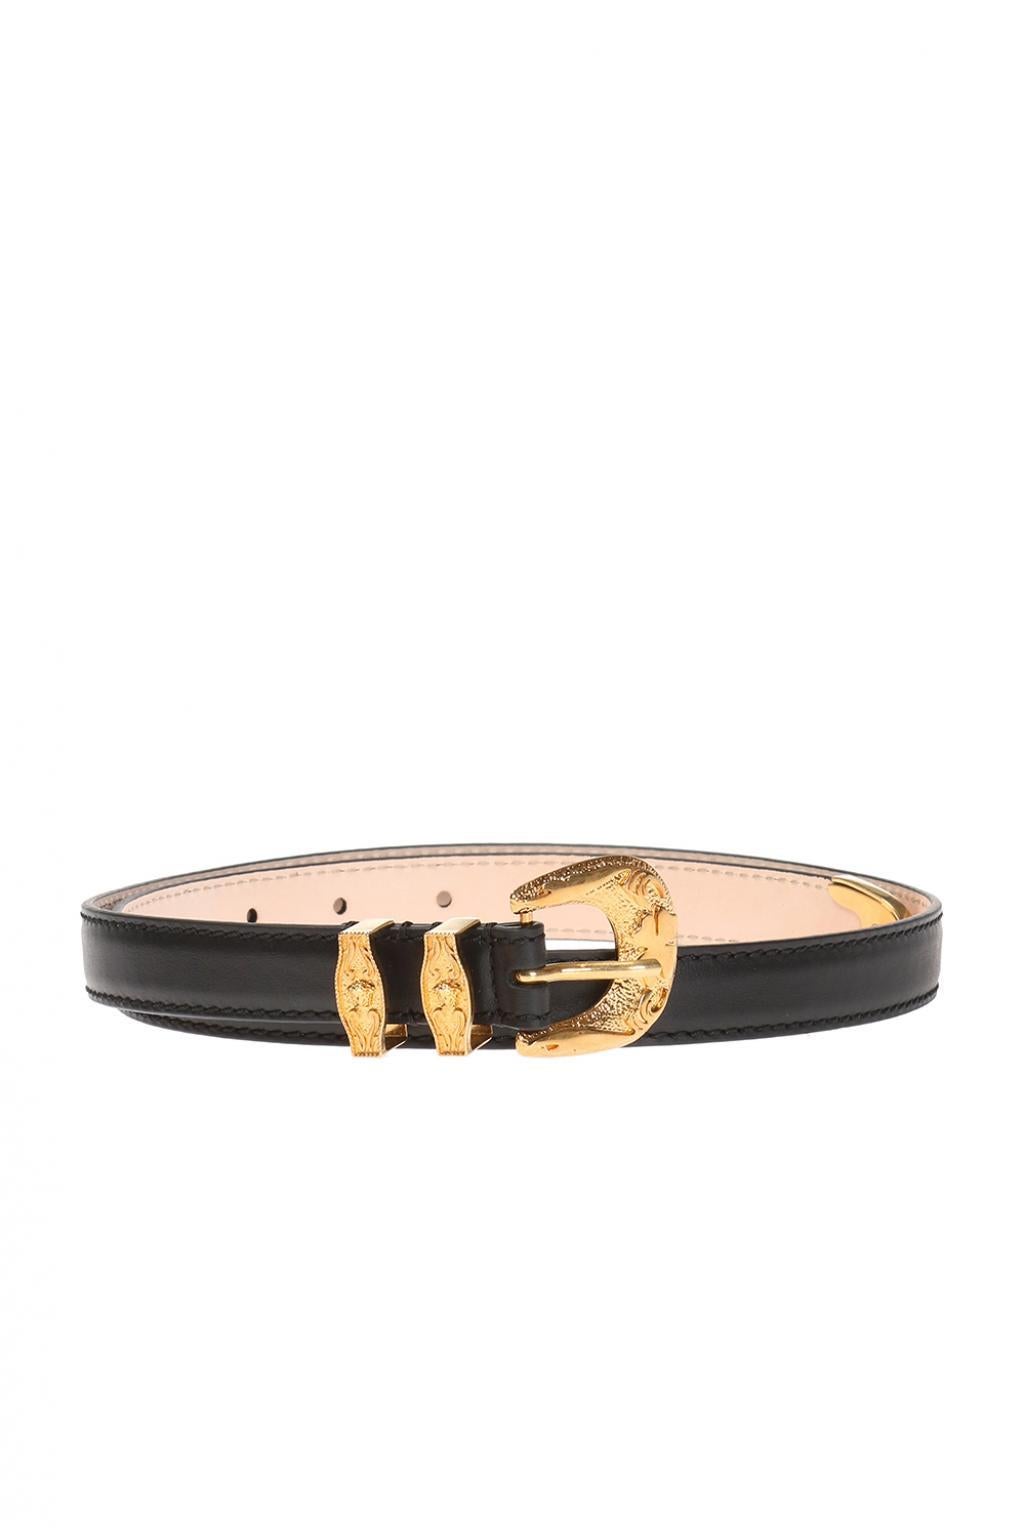 Versace Black Leather and Gold Tone Baroque Buckle Belt

Crafted in Italy from black calf leather, this antique inspired belt from Versace features antique effect gold-tone hardware, an adjustable fastening, punch hole detailing and an engraved